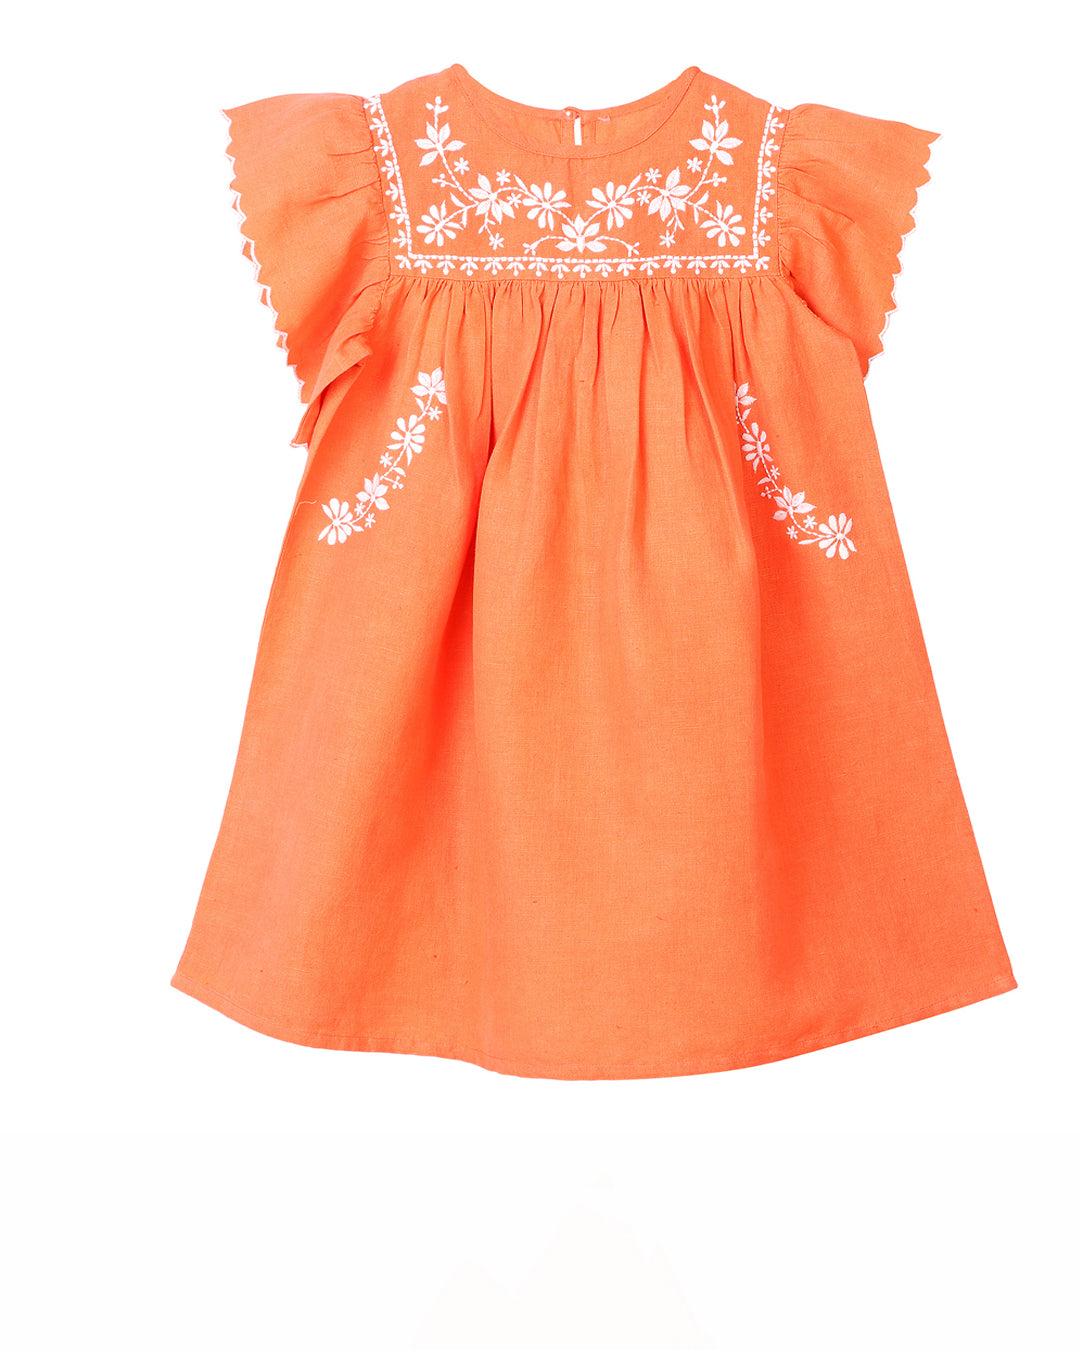 LINEN DRESS IN ORANGE WITH EMBROIDERY       (LEAD TIME-10-15 DAYS)